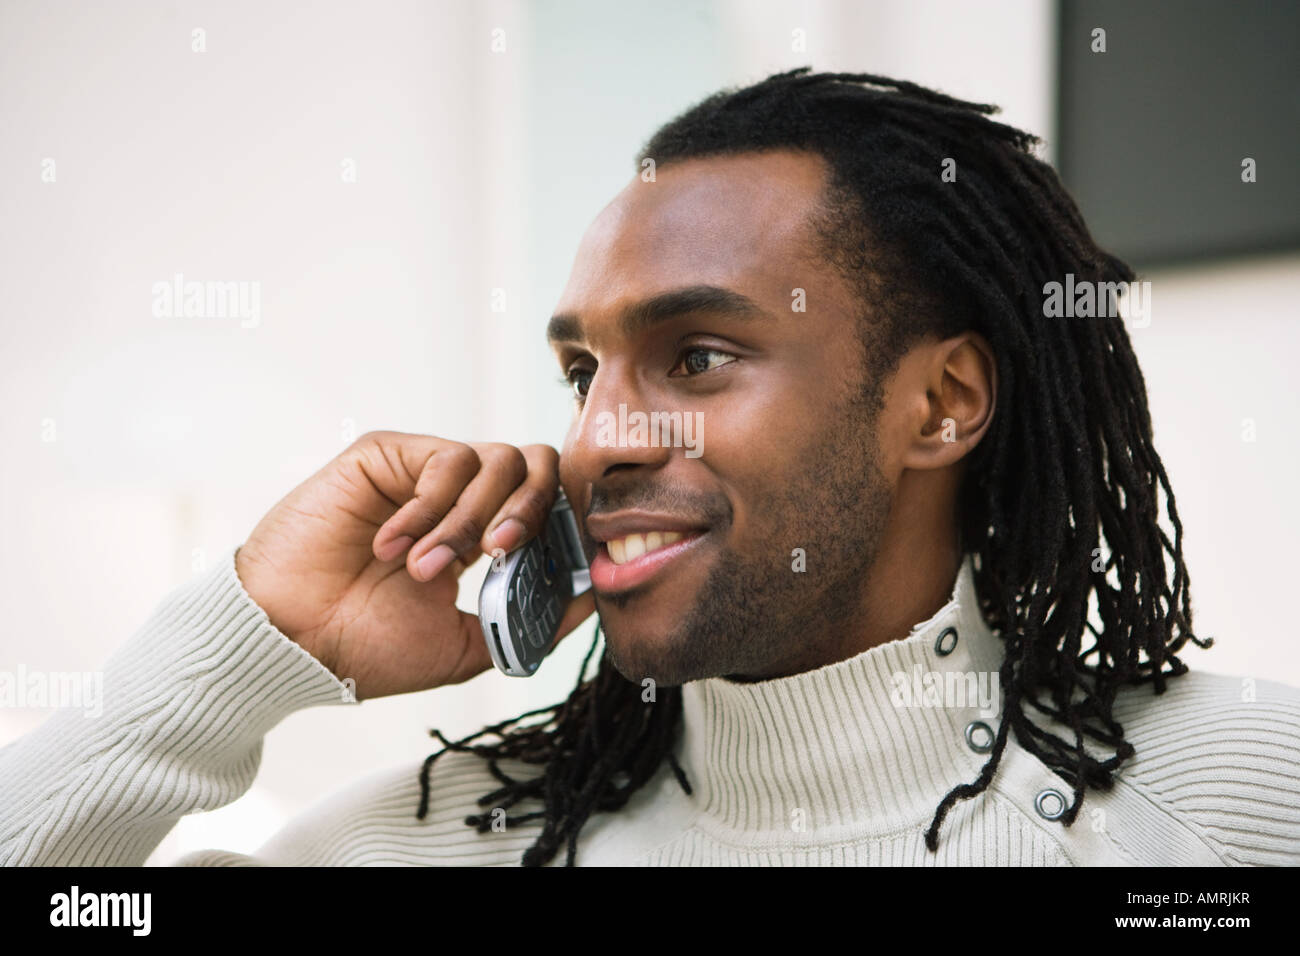 African man talking on cell phone Stock Photo